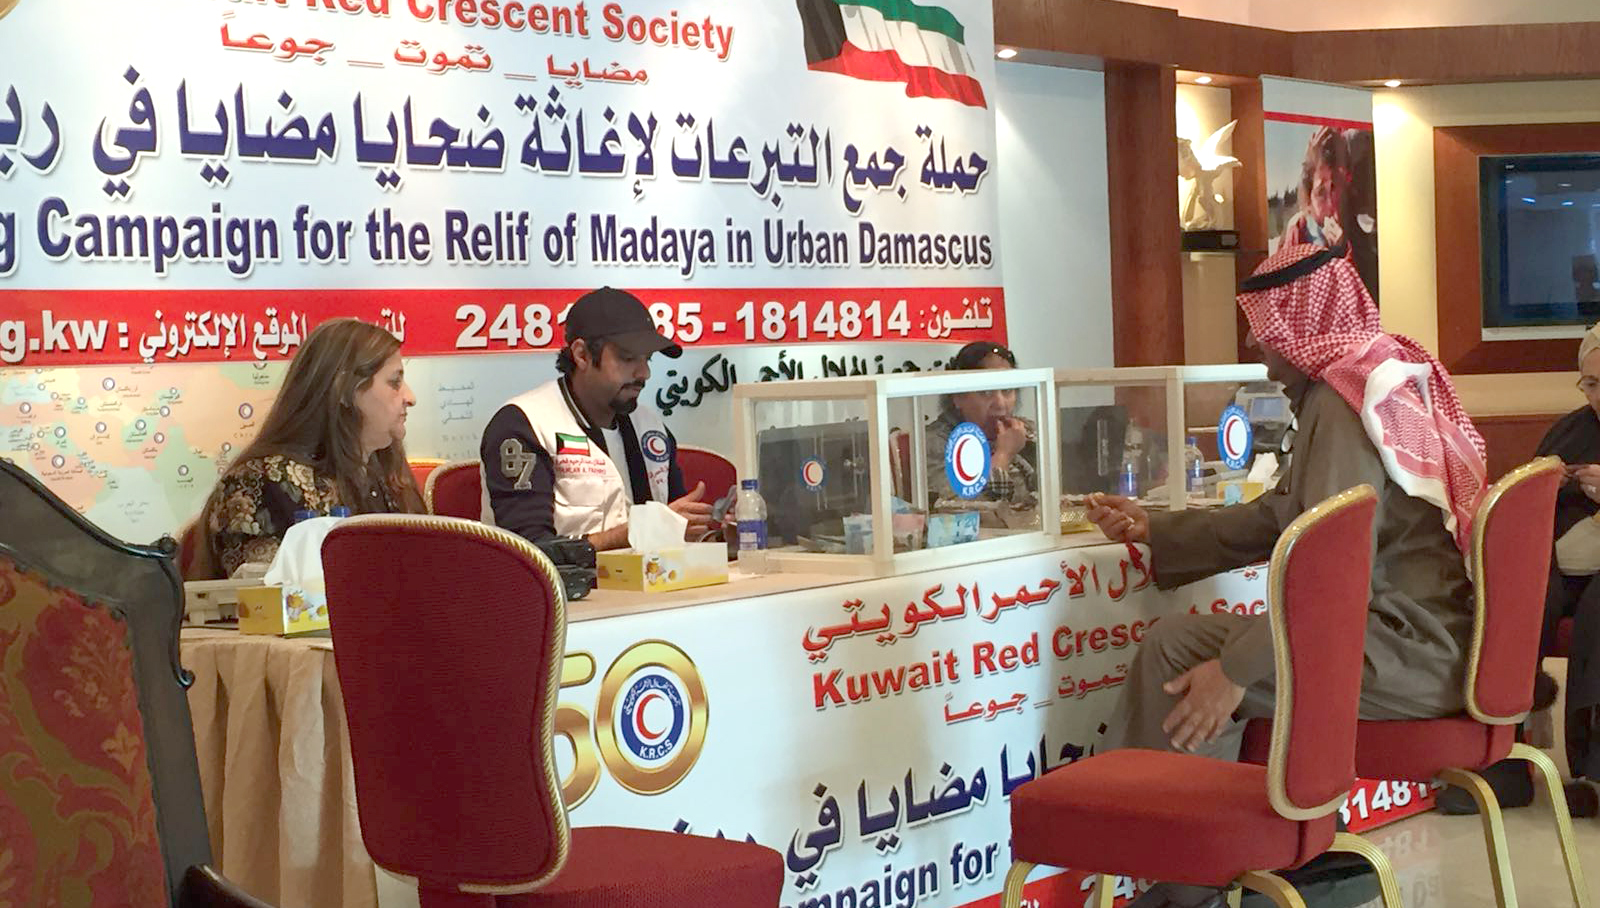 Kuwait Red Crescent Society collects USD 500,000 in donations for residents of Madaya